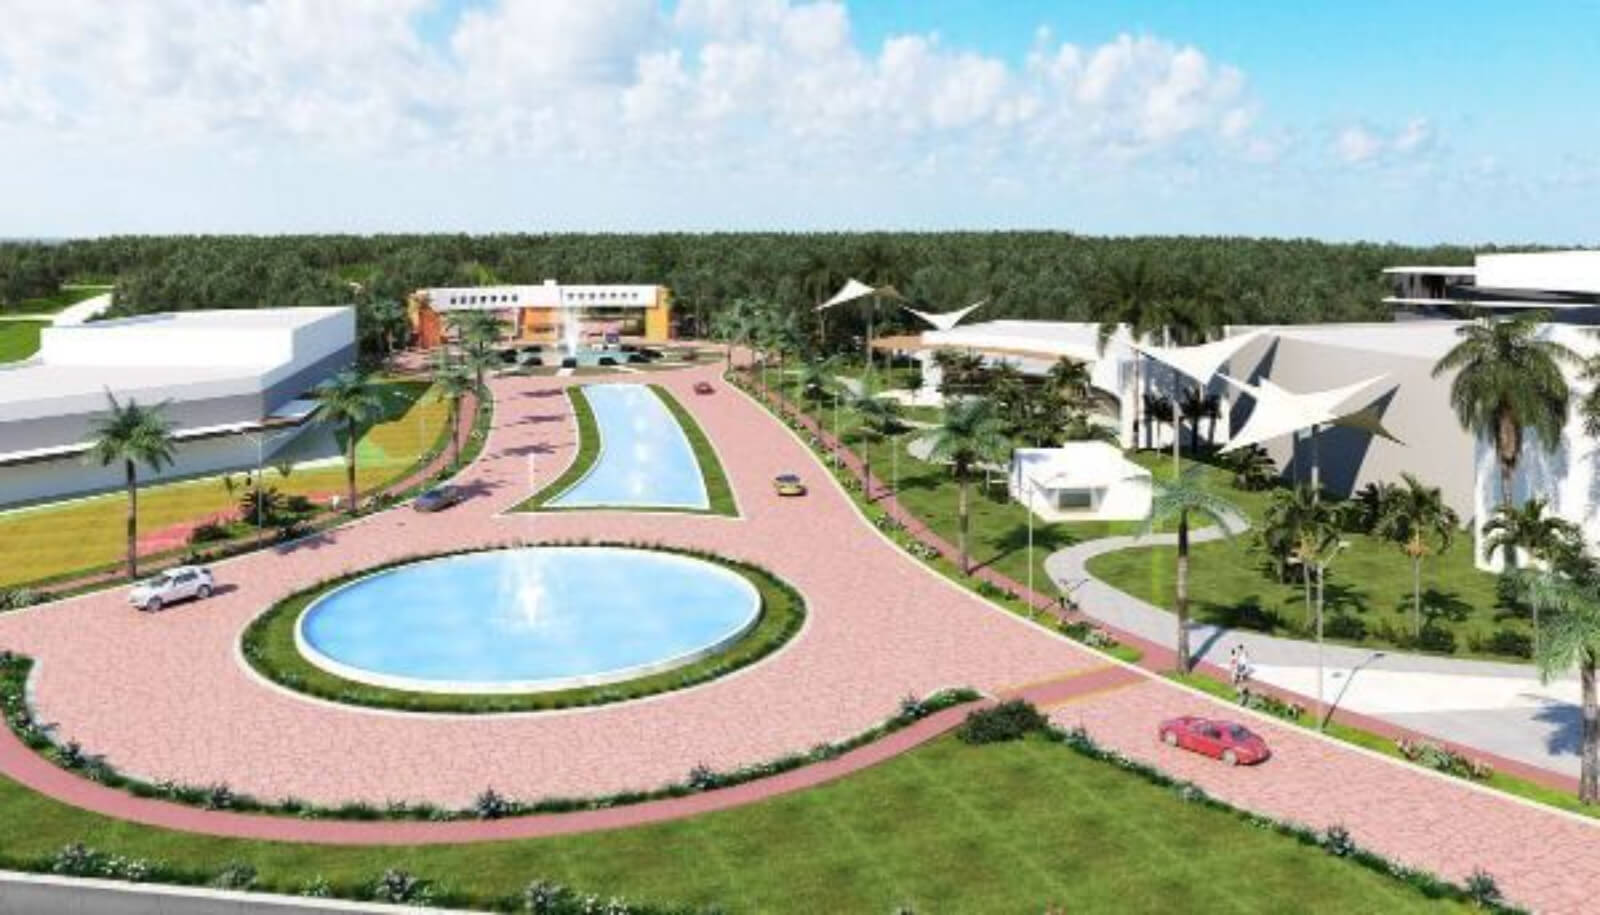 Apartment in gated community with amenities: 7,500 m2 of parks, sports courts, outdoor gym, bike path and more in La Arbolada, Cancun